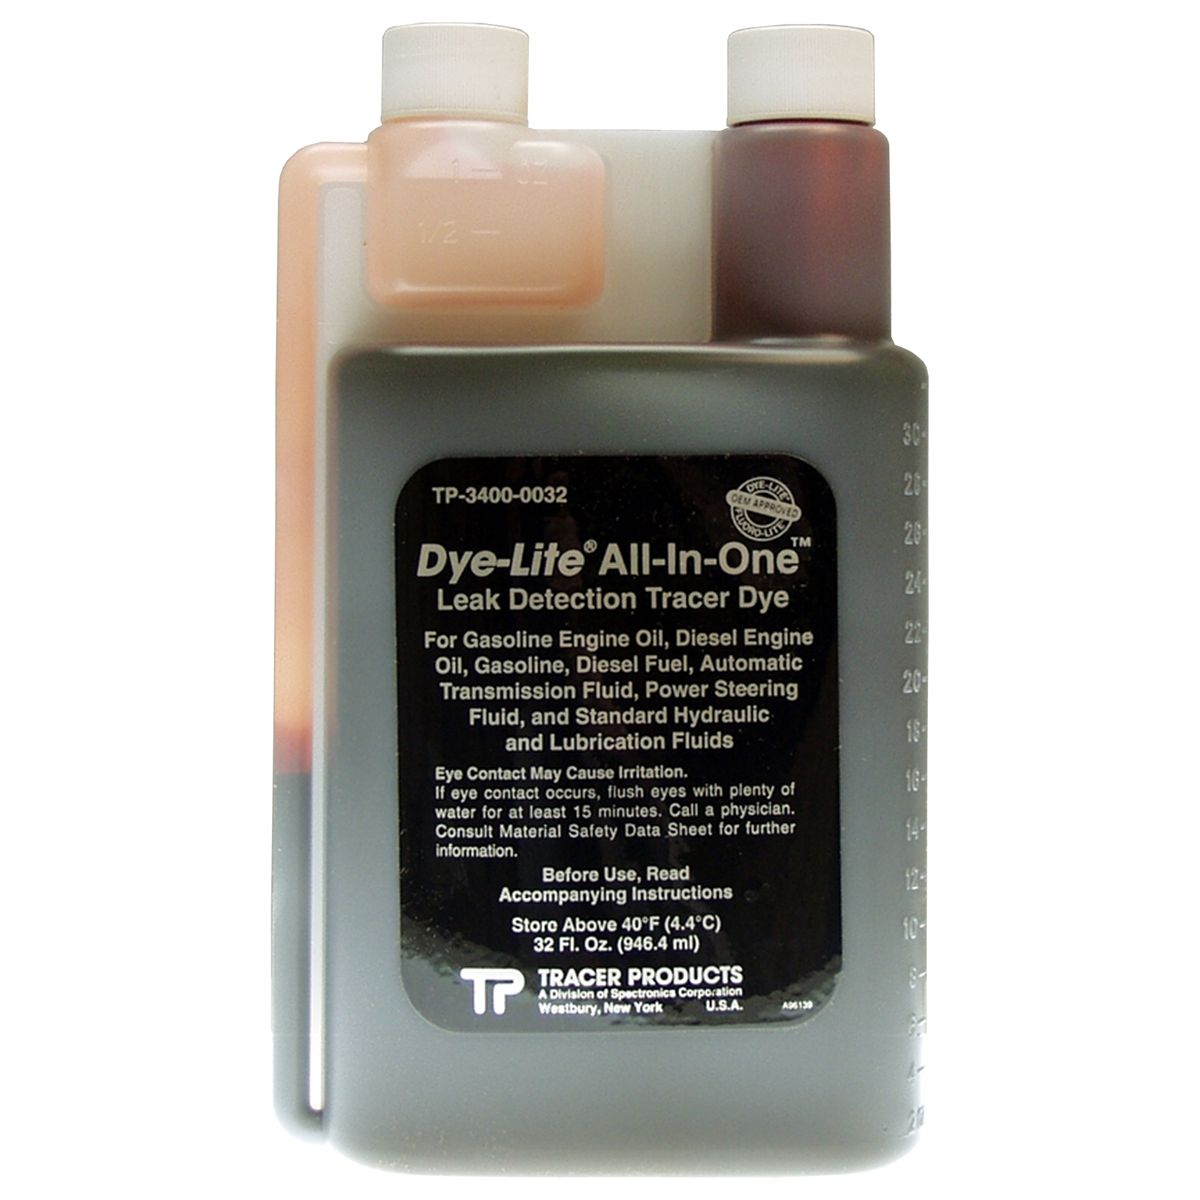 Dye-Lite(R) All-In-One Concentrated Dye